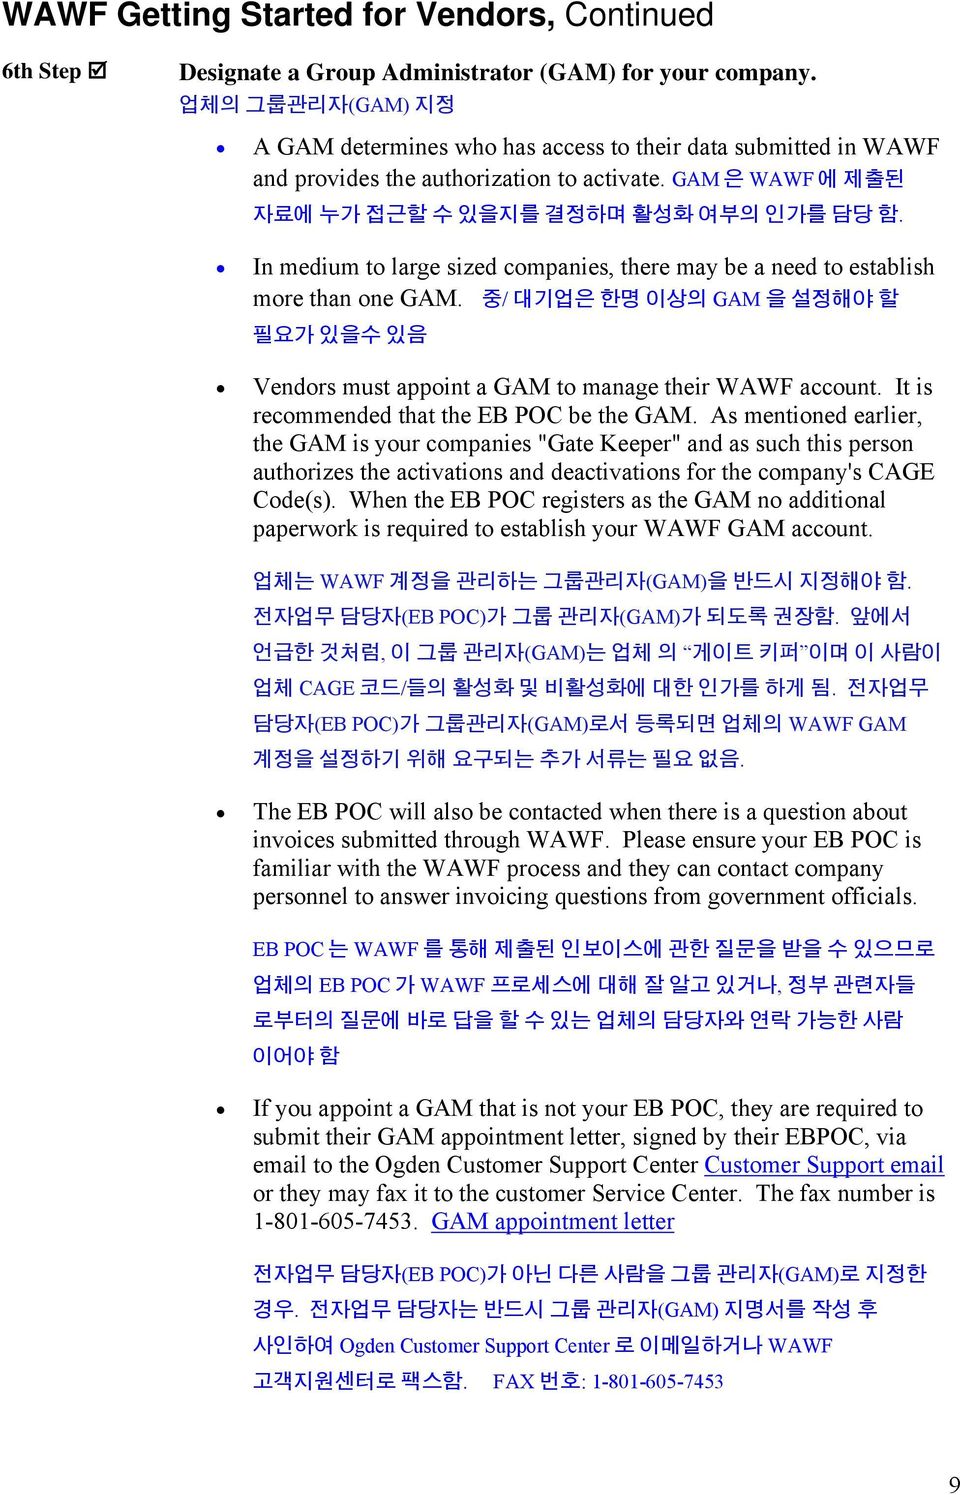 In medium to large sized companies, there may be a need to establish more than one GAM. 중/ 대기업은 한명 이상의 GAM 을 설정해야 할 필요가 있을수 있음 Vendors must appoint a GAM to manage their WAWF account.